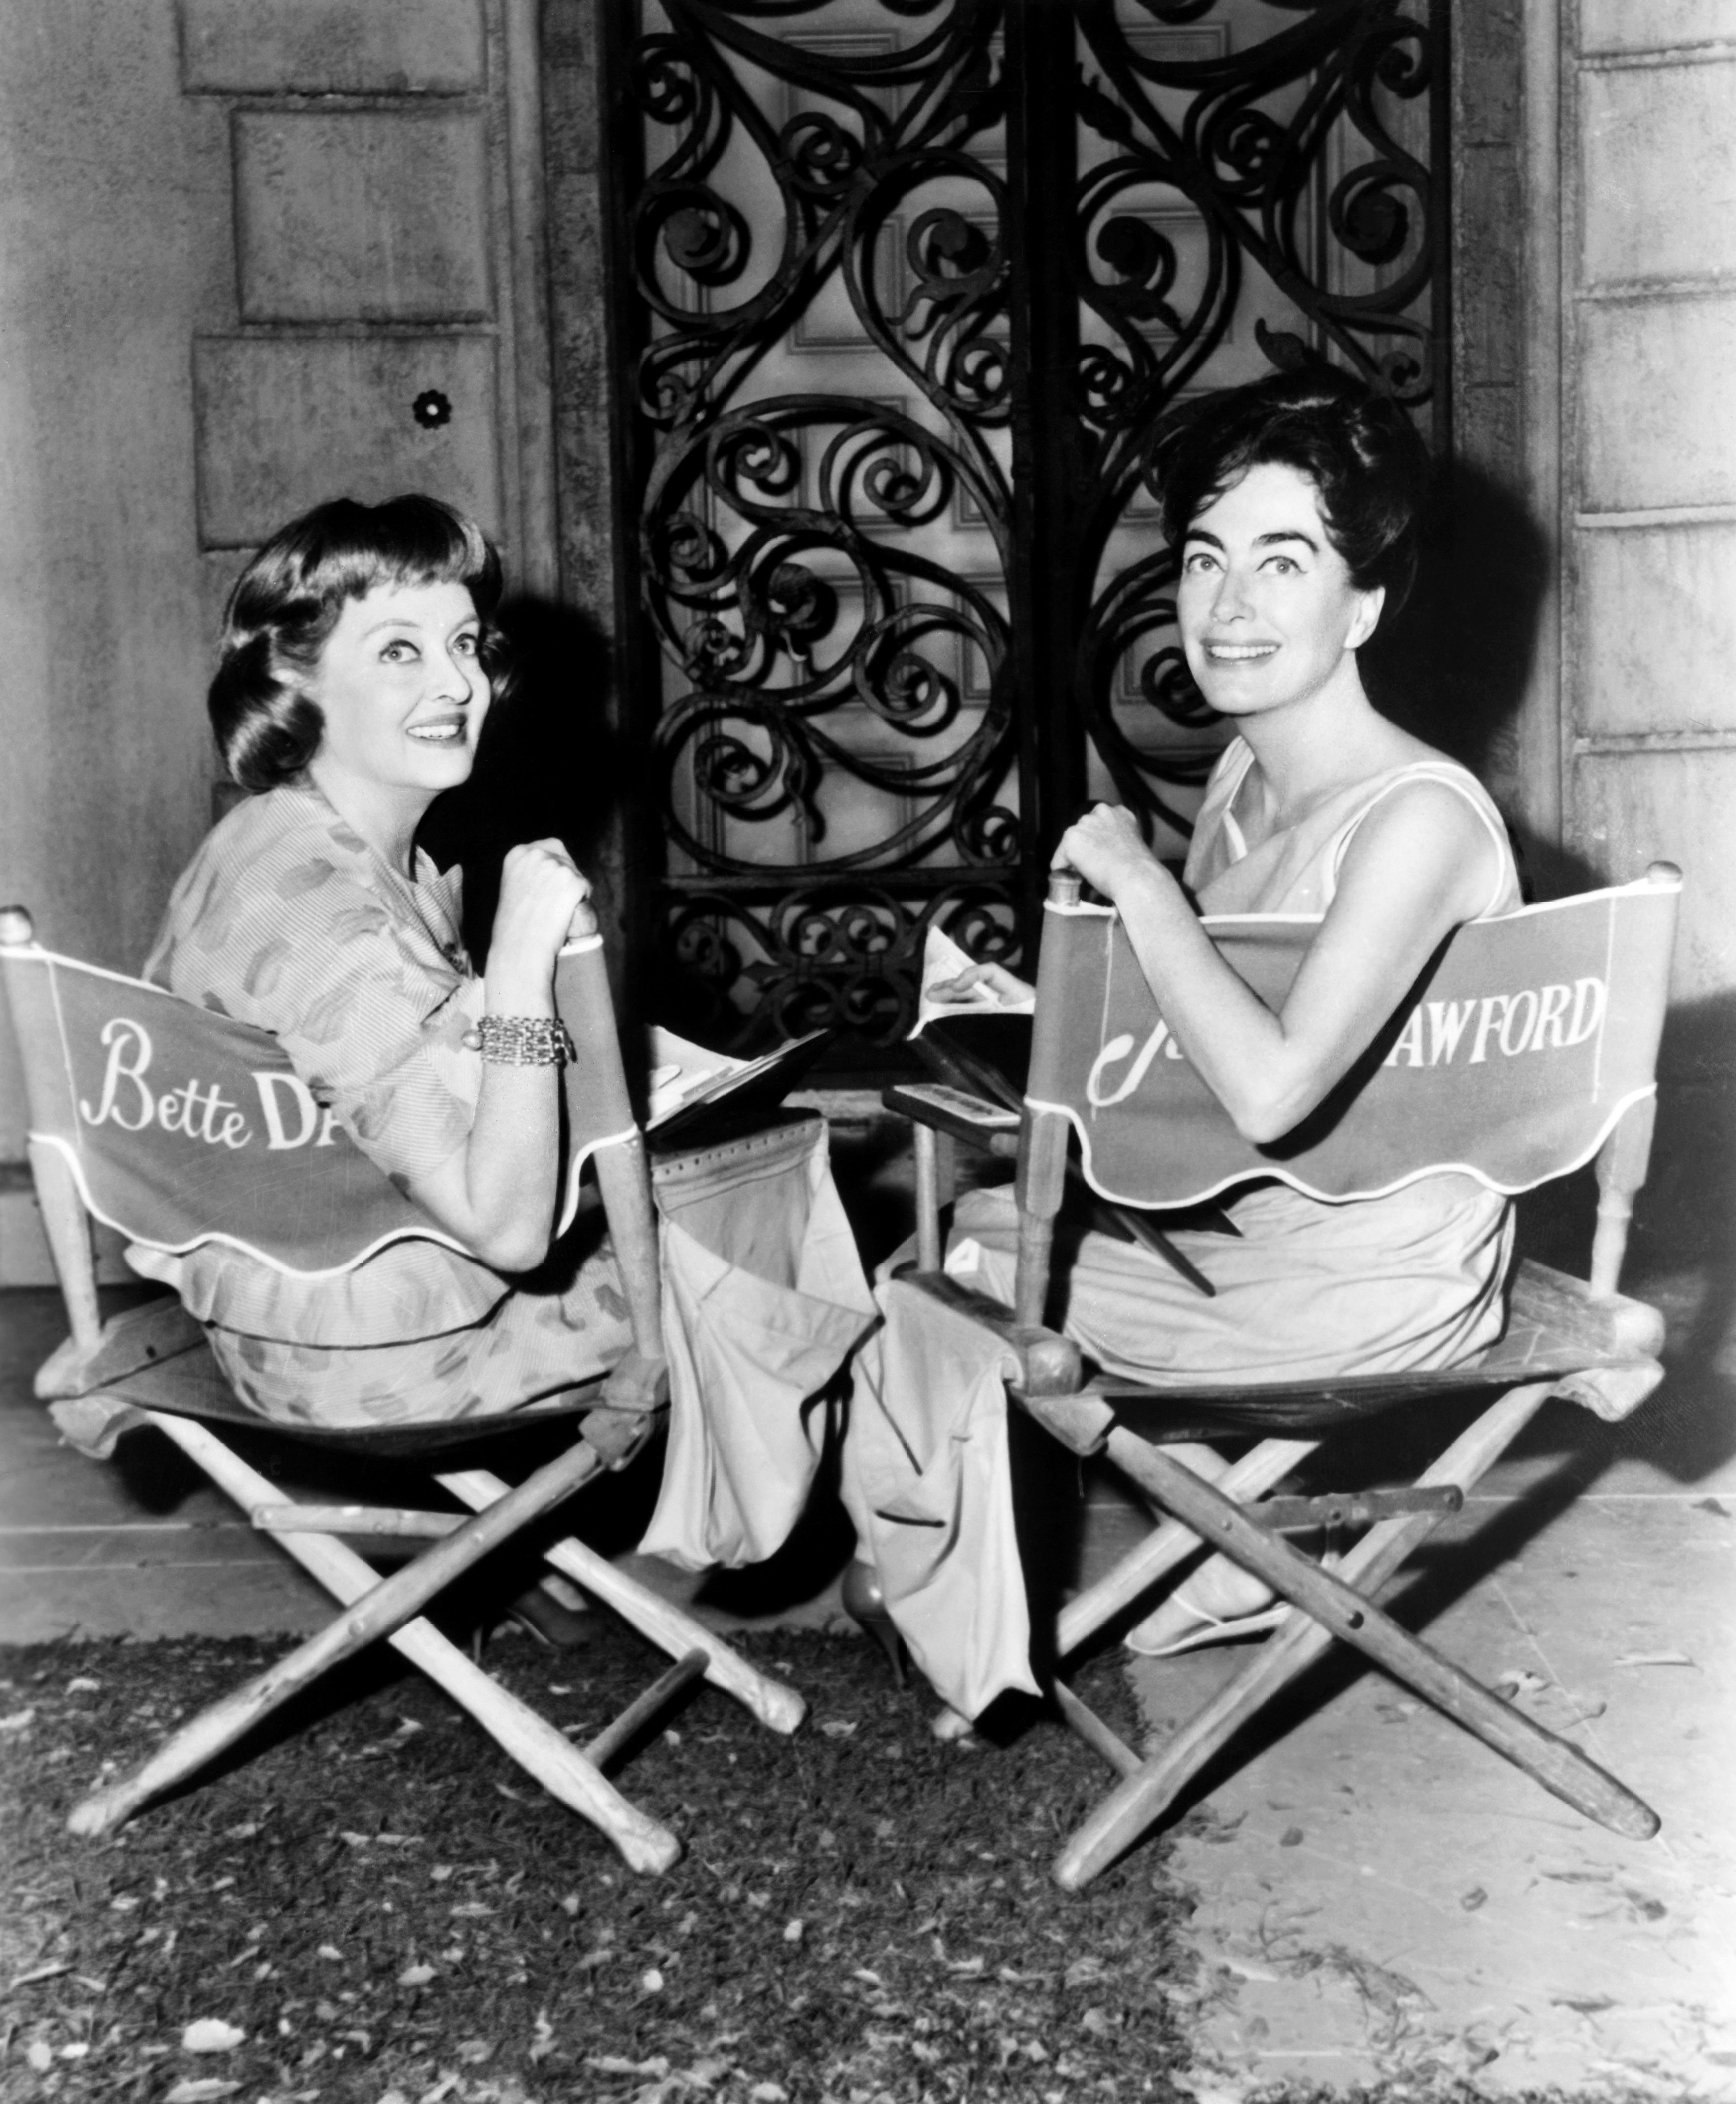 The 'reel' Bette and Joan: The stars behind 'Feud'